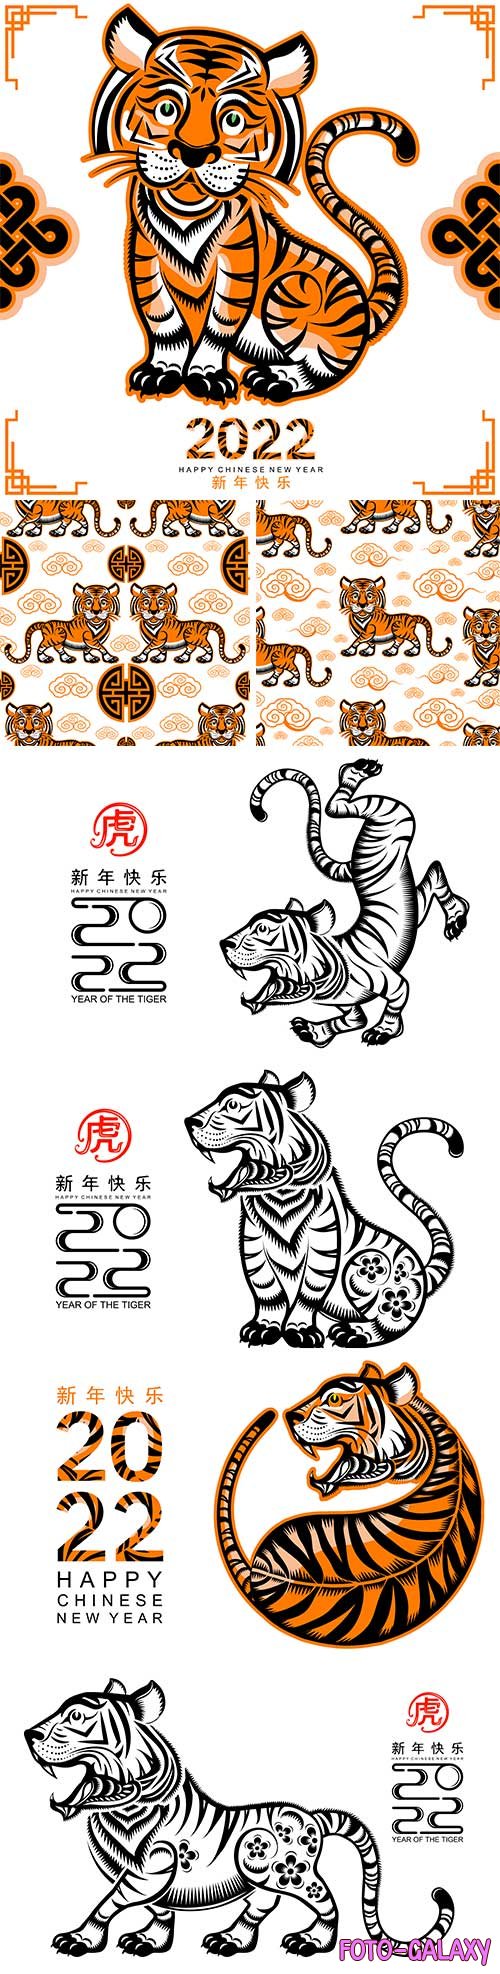 New year 2022 year of the tiger, seamless pattern premium vector